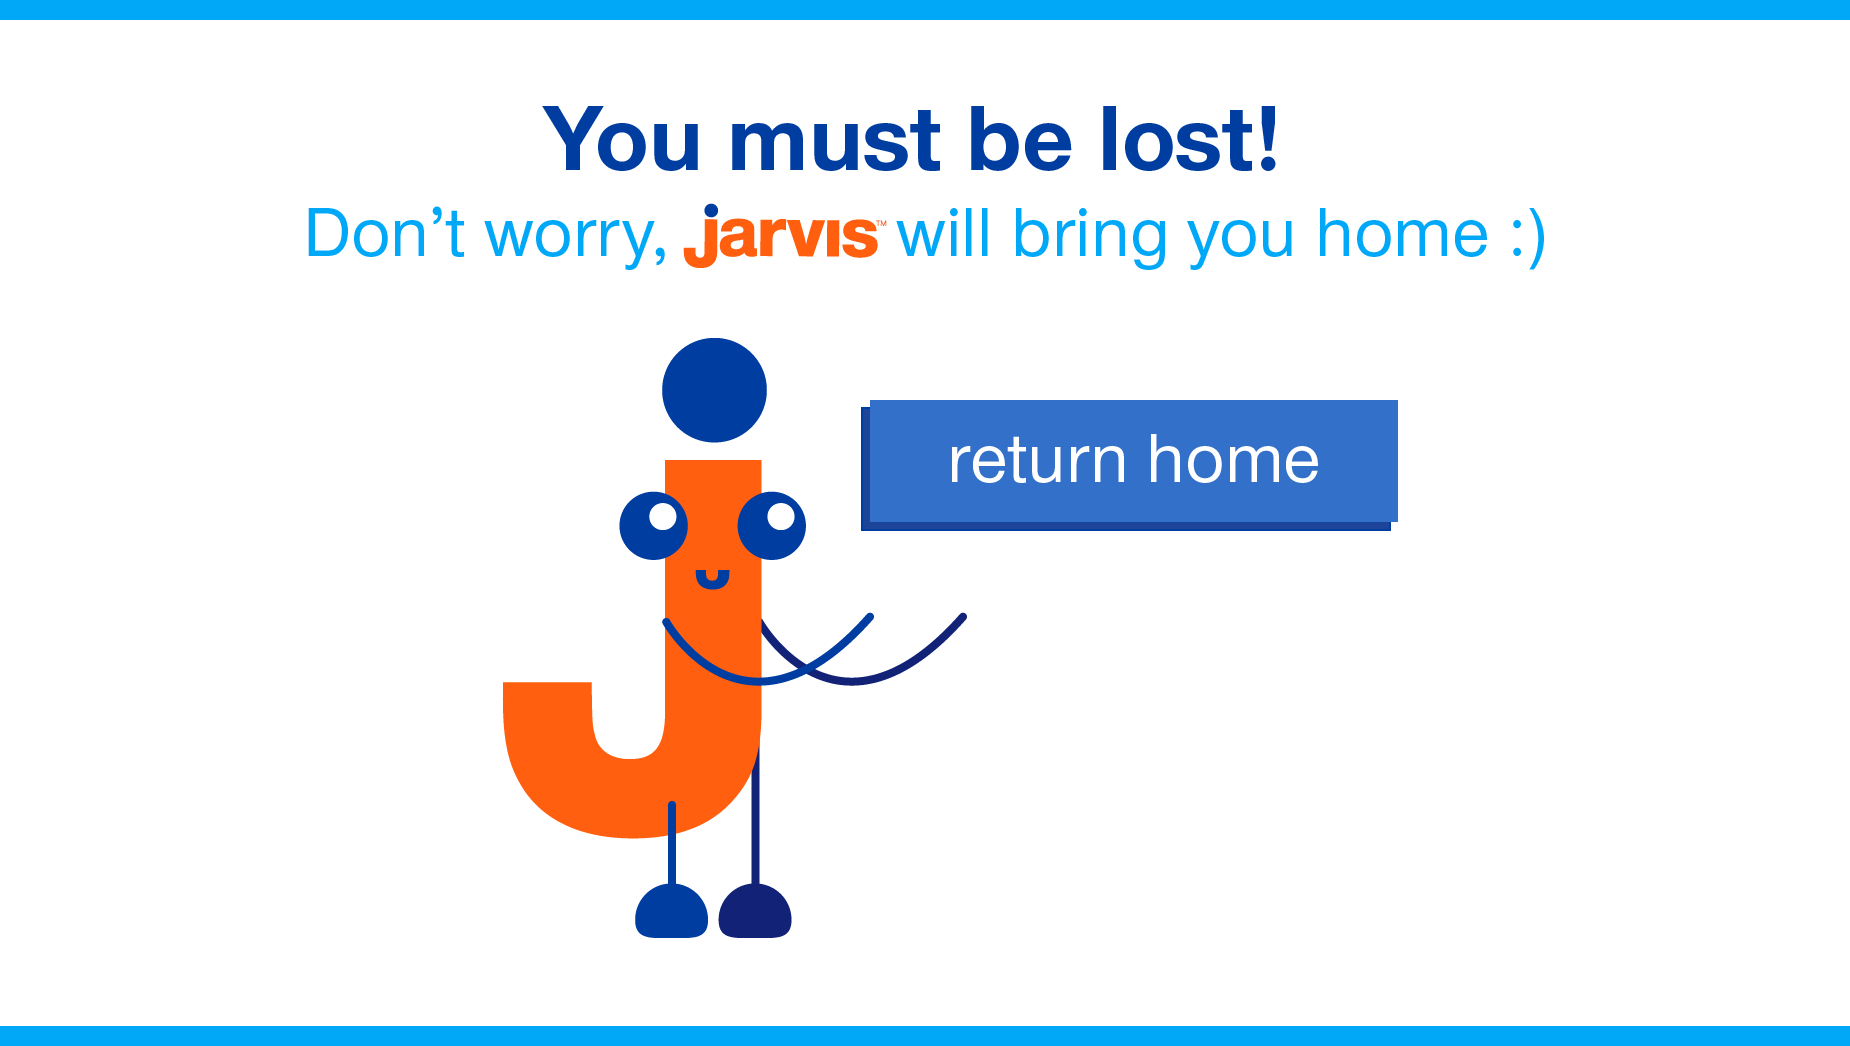 You must be lost! Don't worry, jarvis will bring you home.